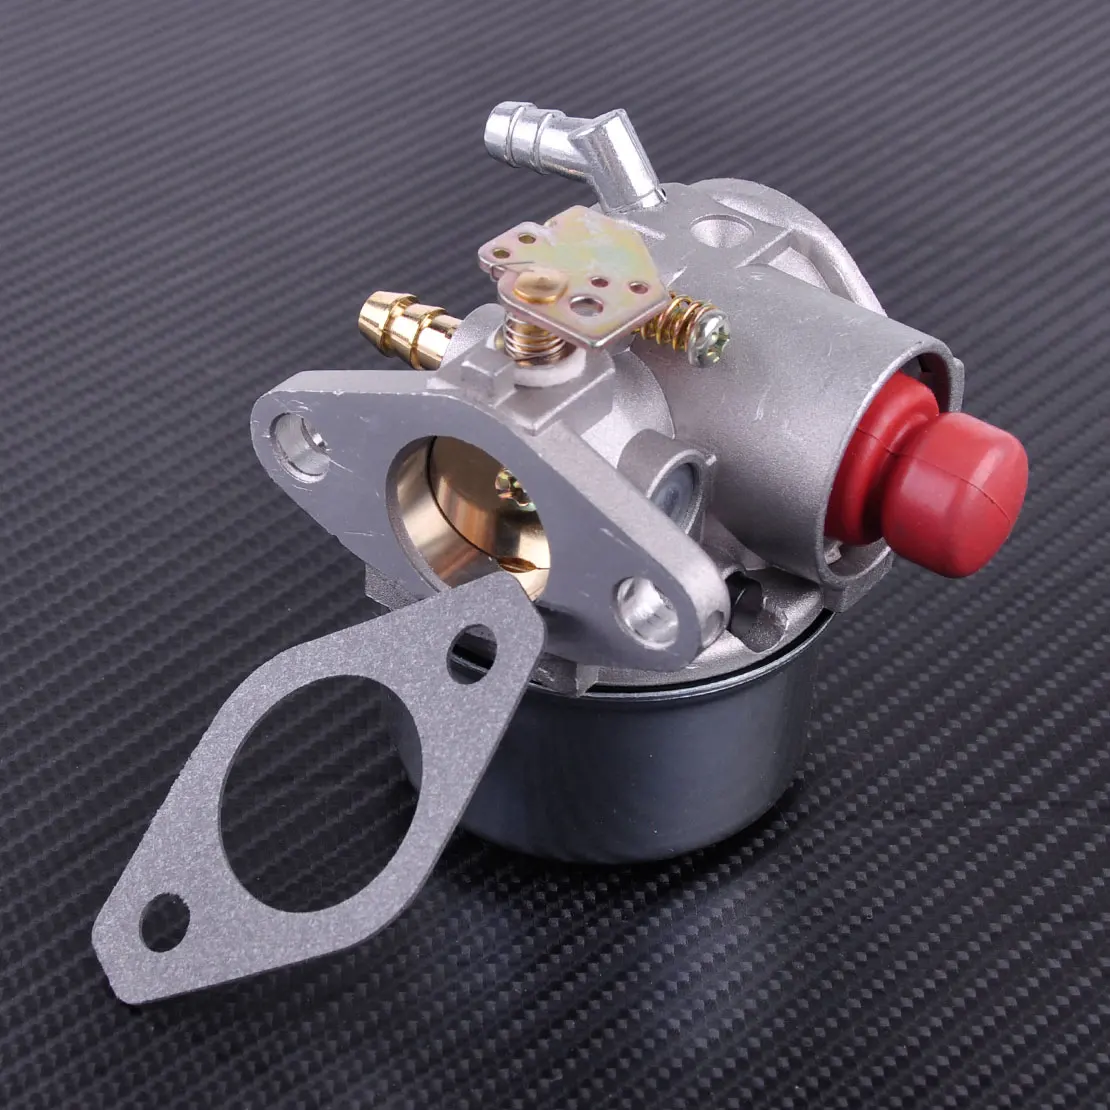 

LETAOSK Carburetor Carb with Gasket Fit for Tecumseh OHH55 OHH60 OHH65 640025A 640025B